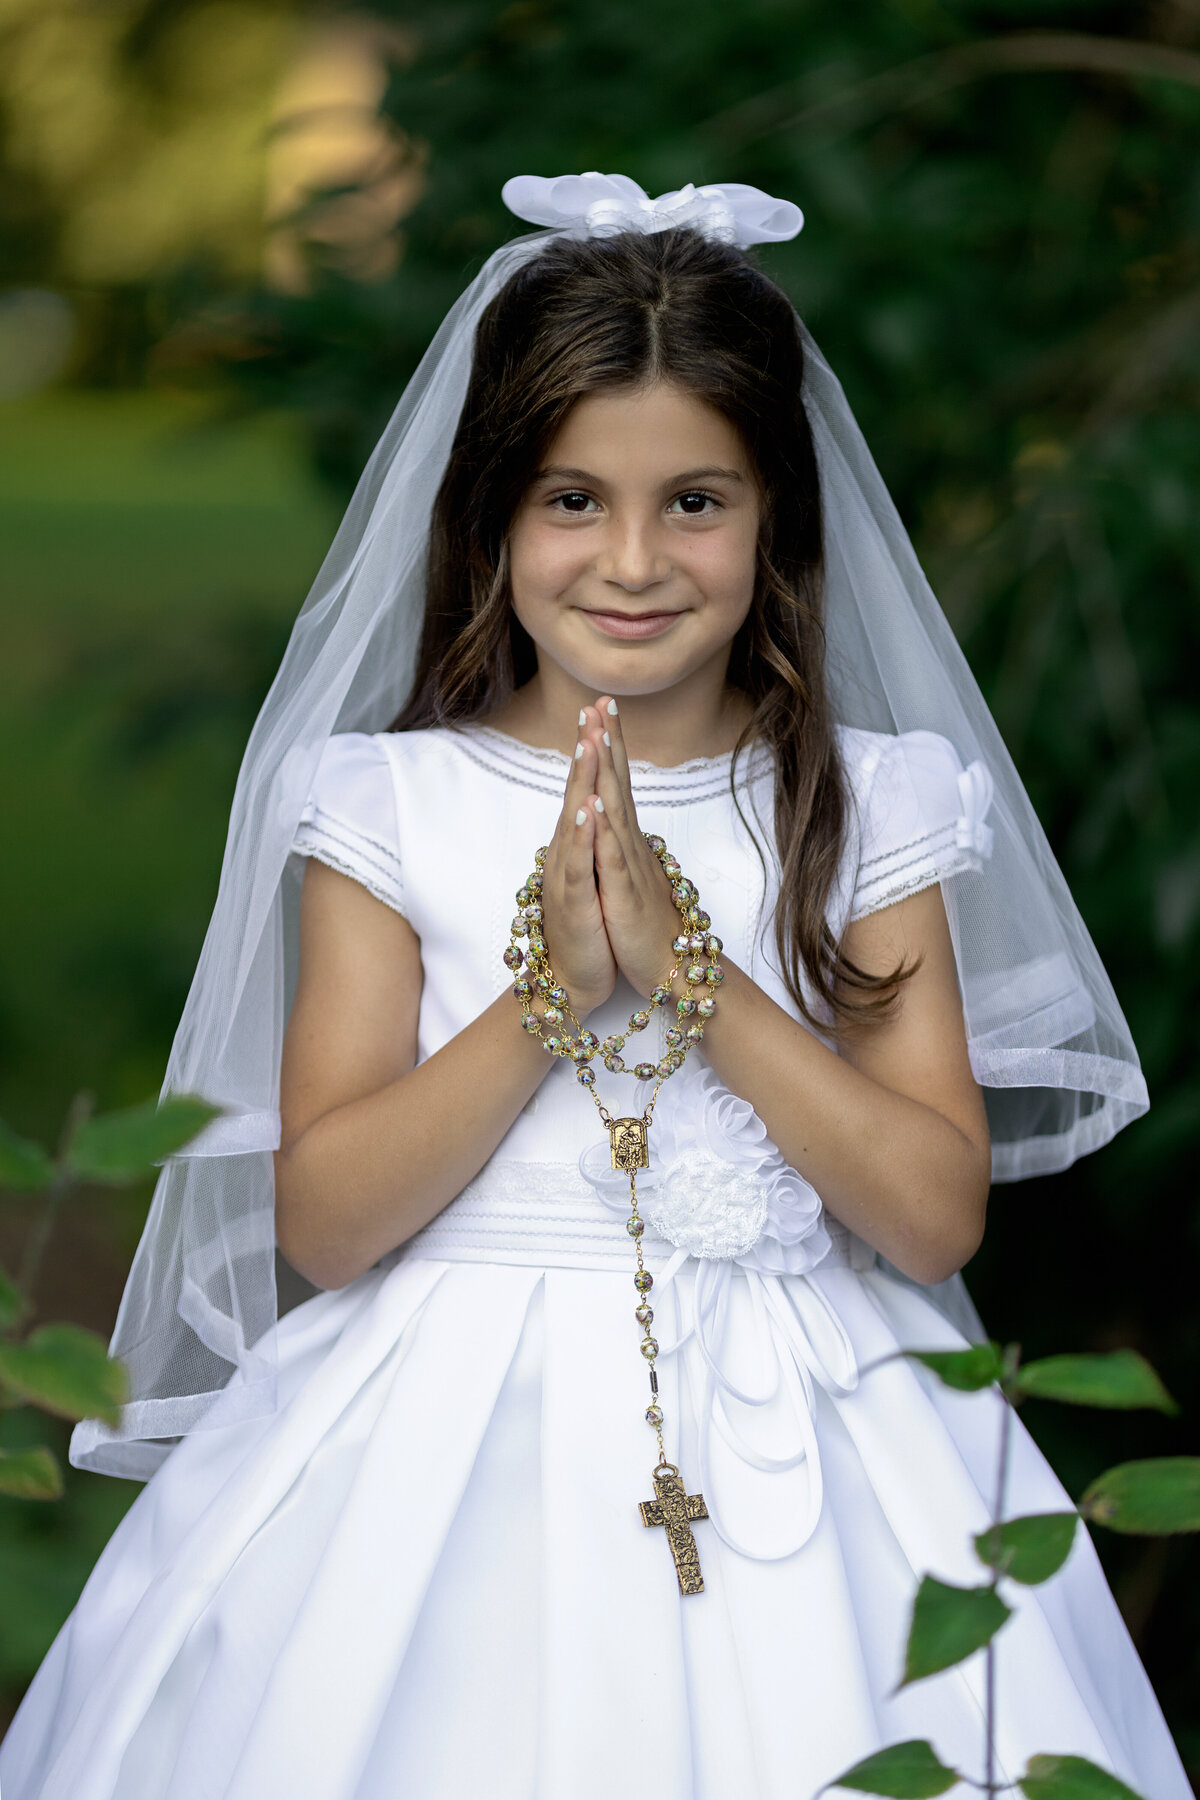 A young girl in a silk white communion dress prays with ornate rosary beads in a park